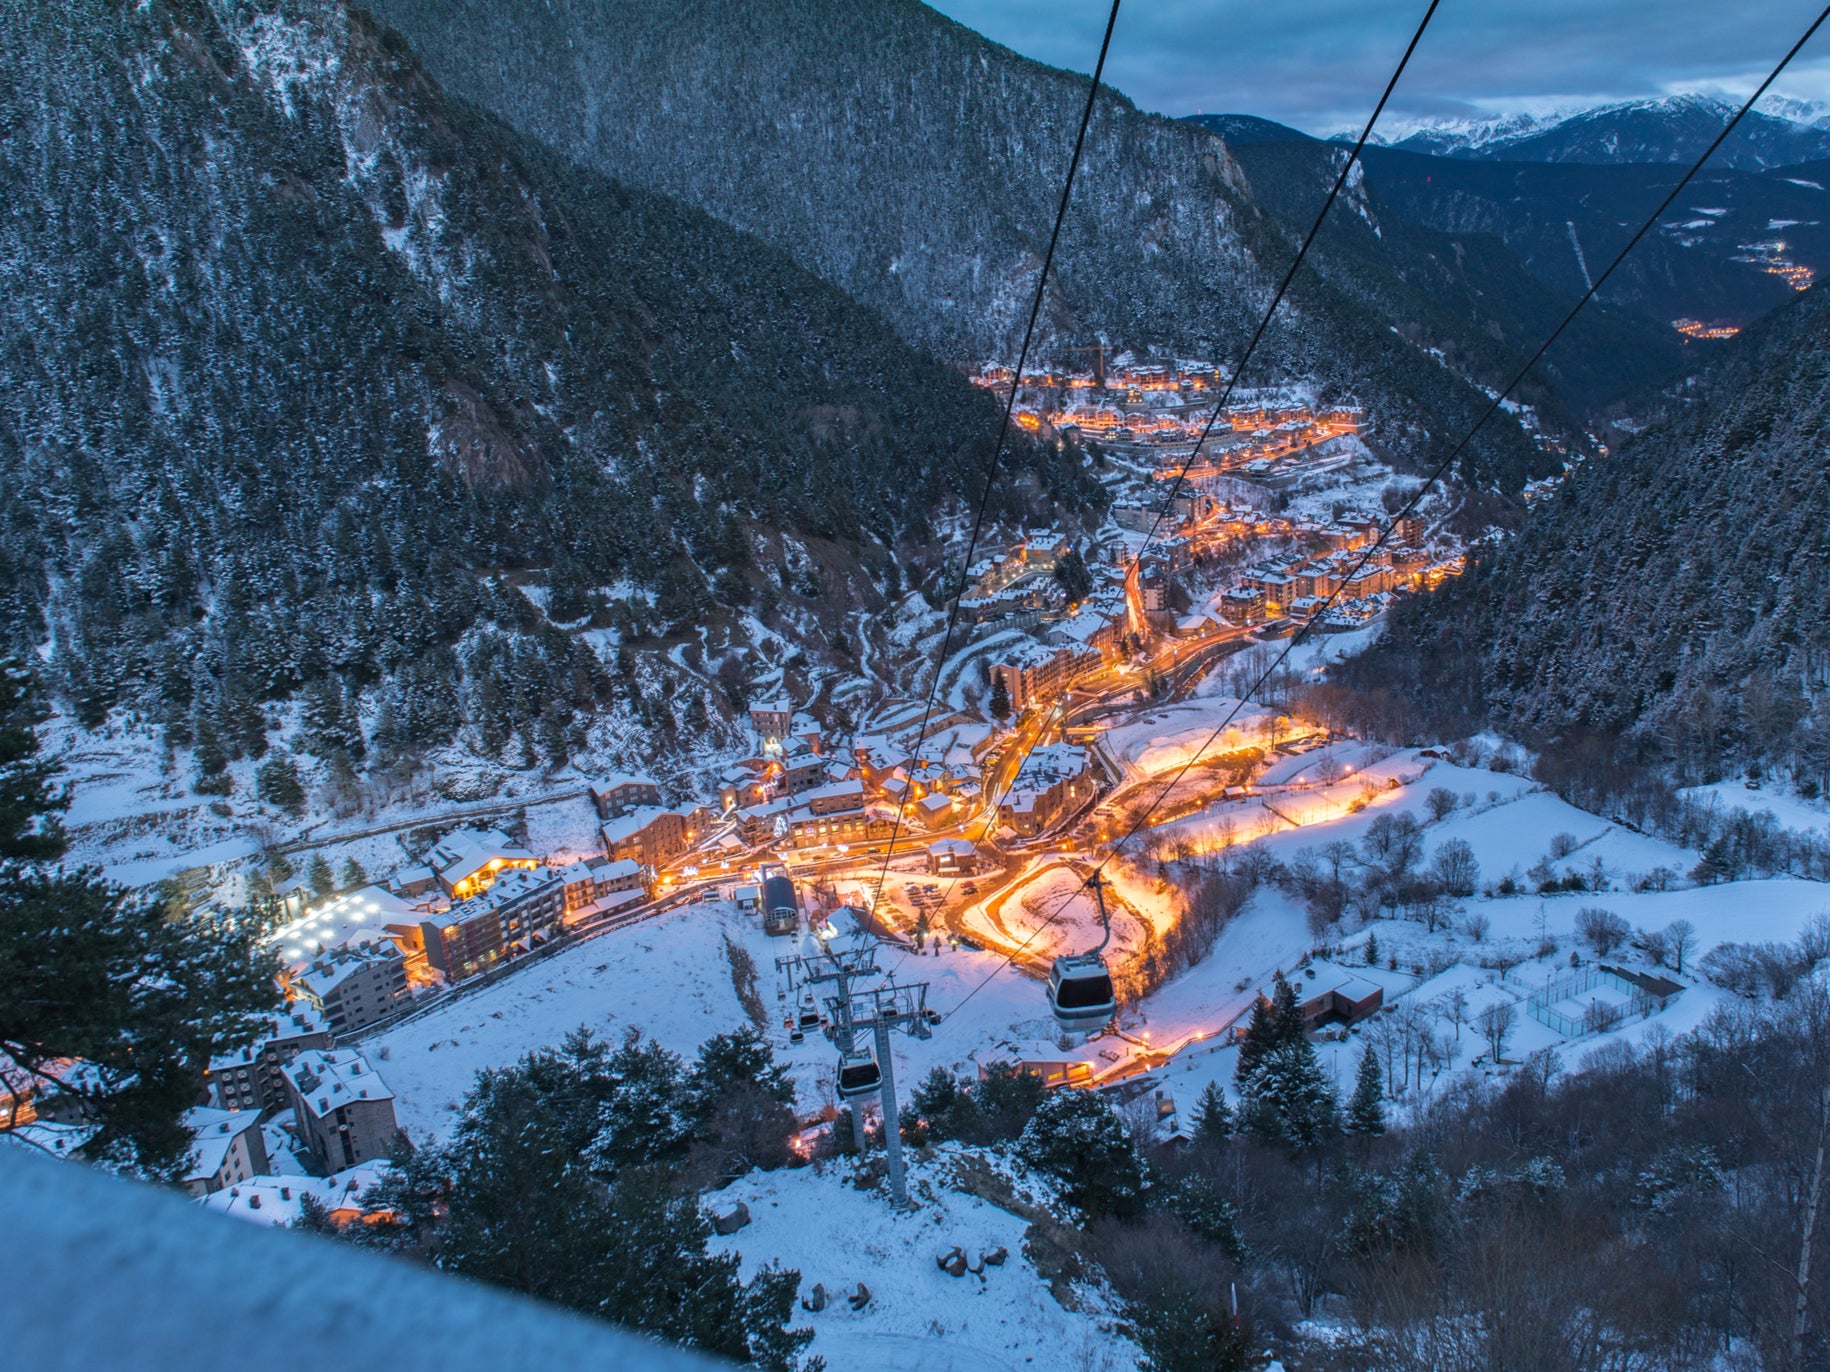 This village is part of the Vallnord ski area